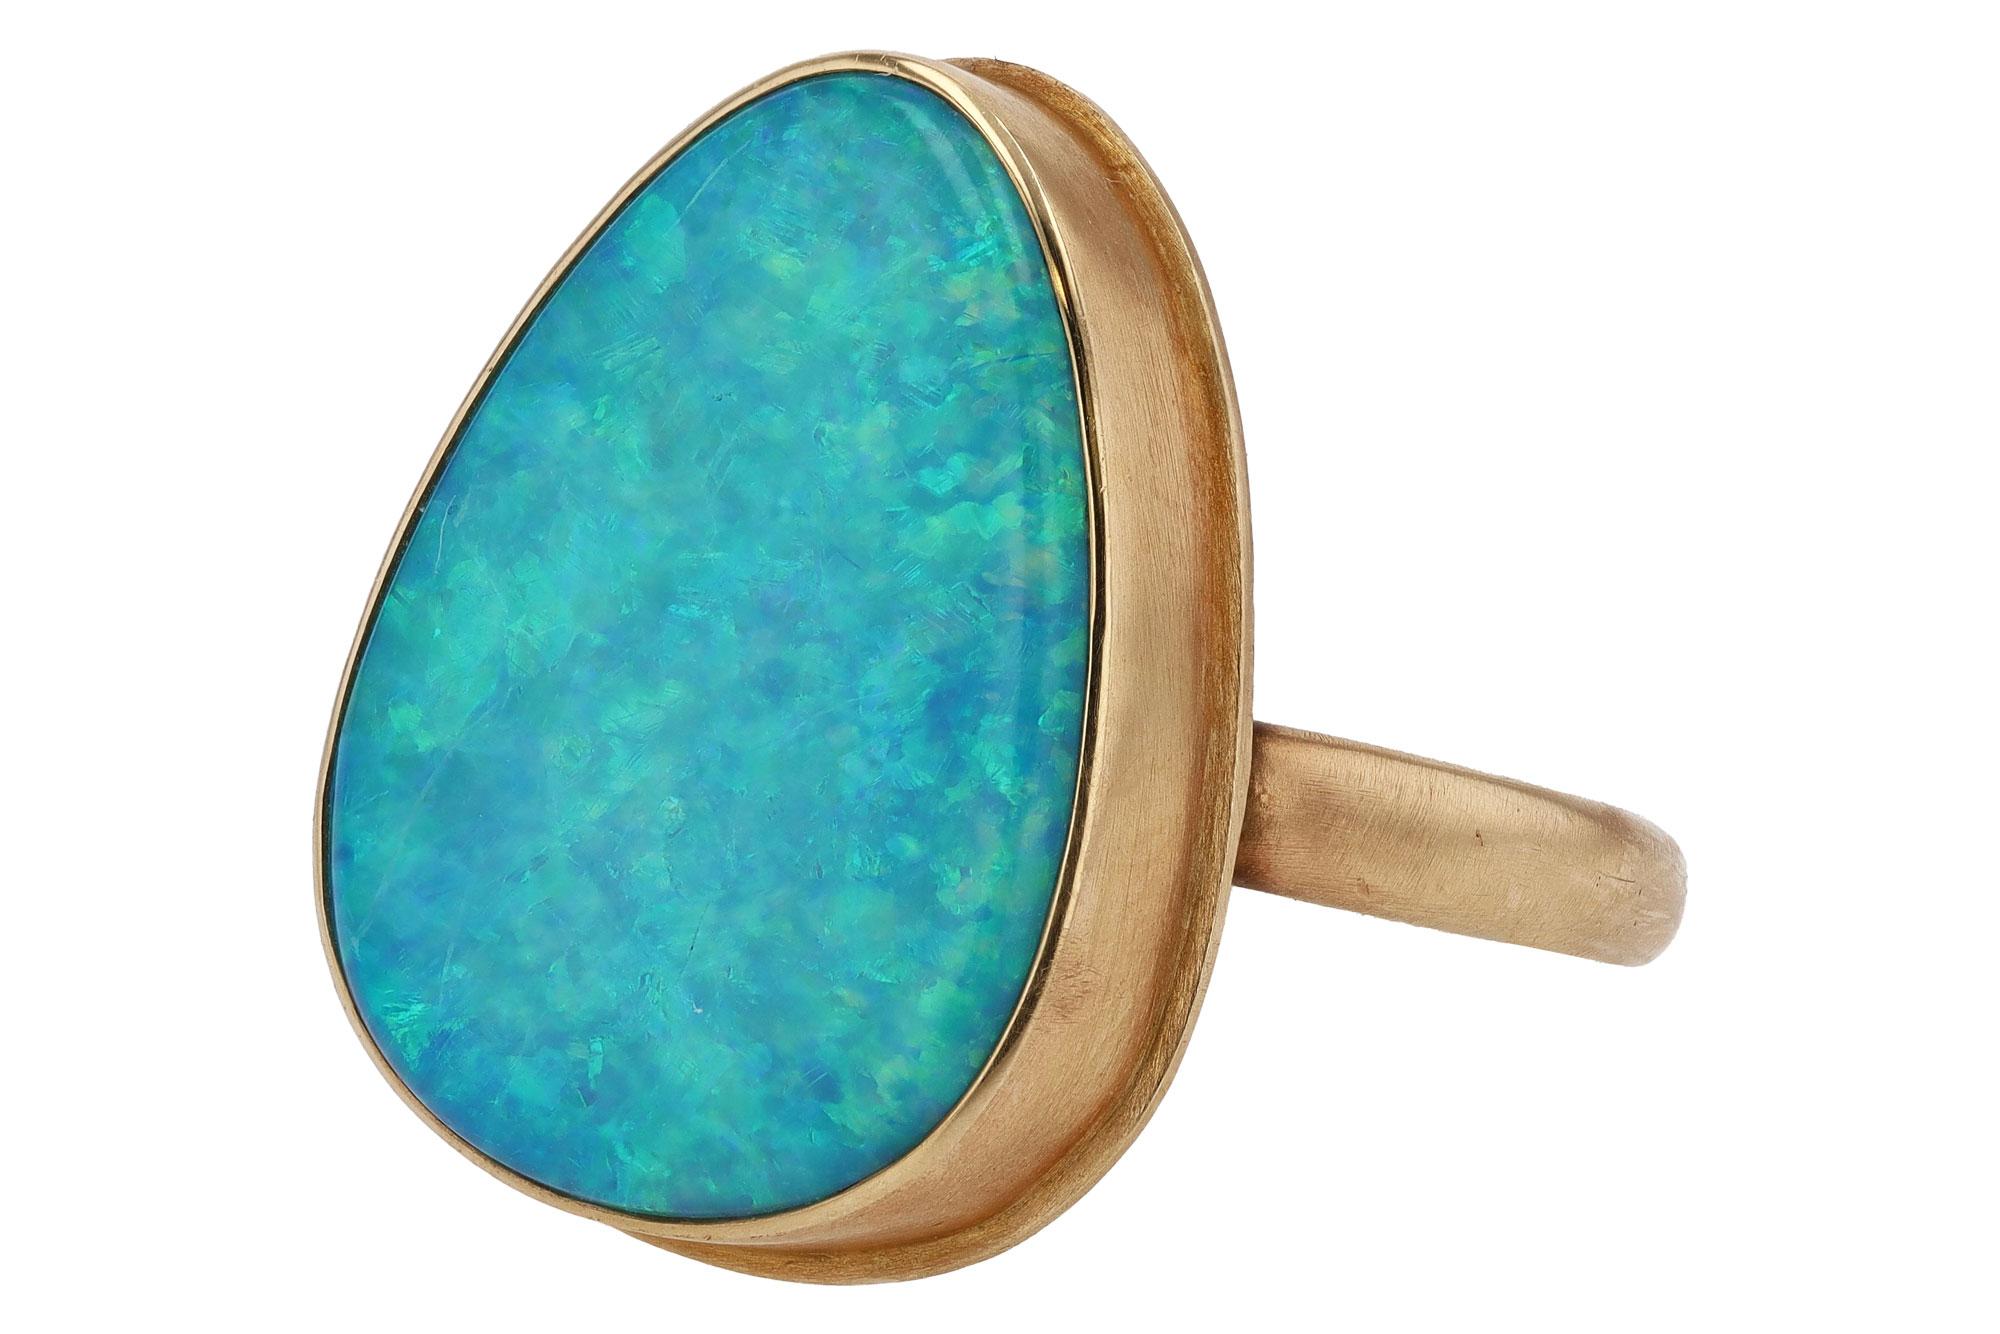 Own a piece of history with this vintage 1970s cocktail ring. The center Australian fire opal weighs 10 carats with prominent play of color. Crafted in 14k yellow gold throughout, this sustainable and ethical jewel is a fantastic value that will be